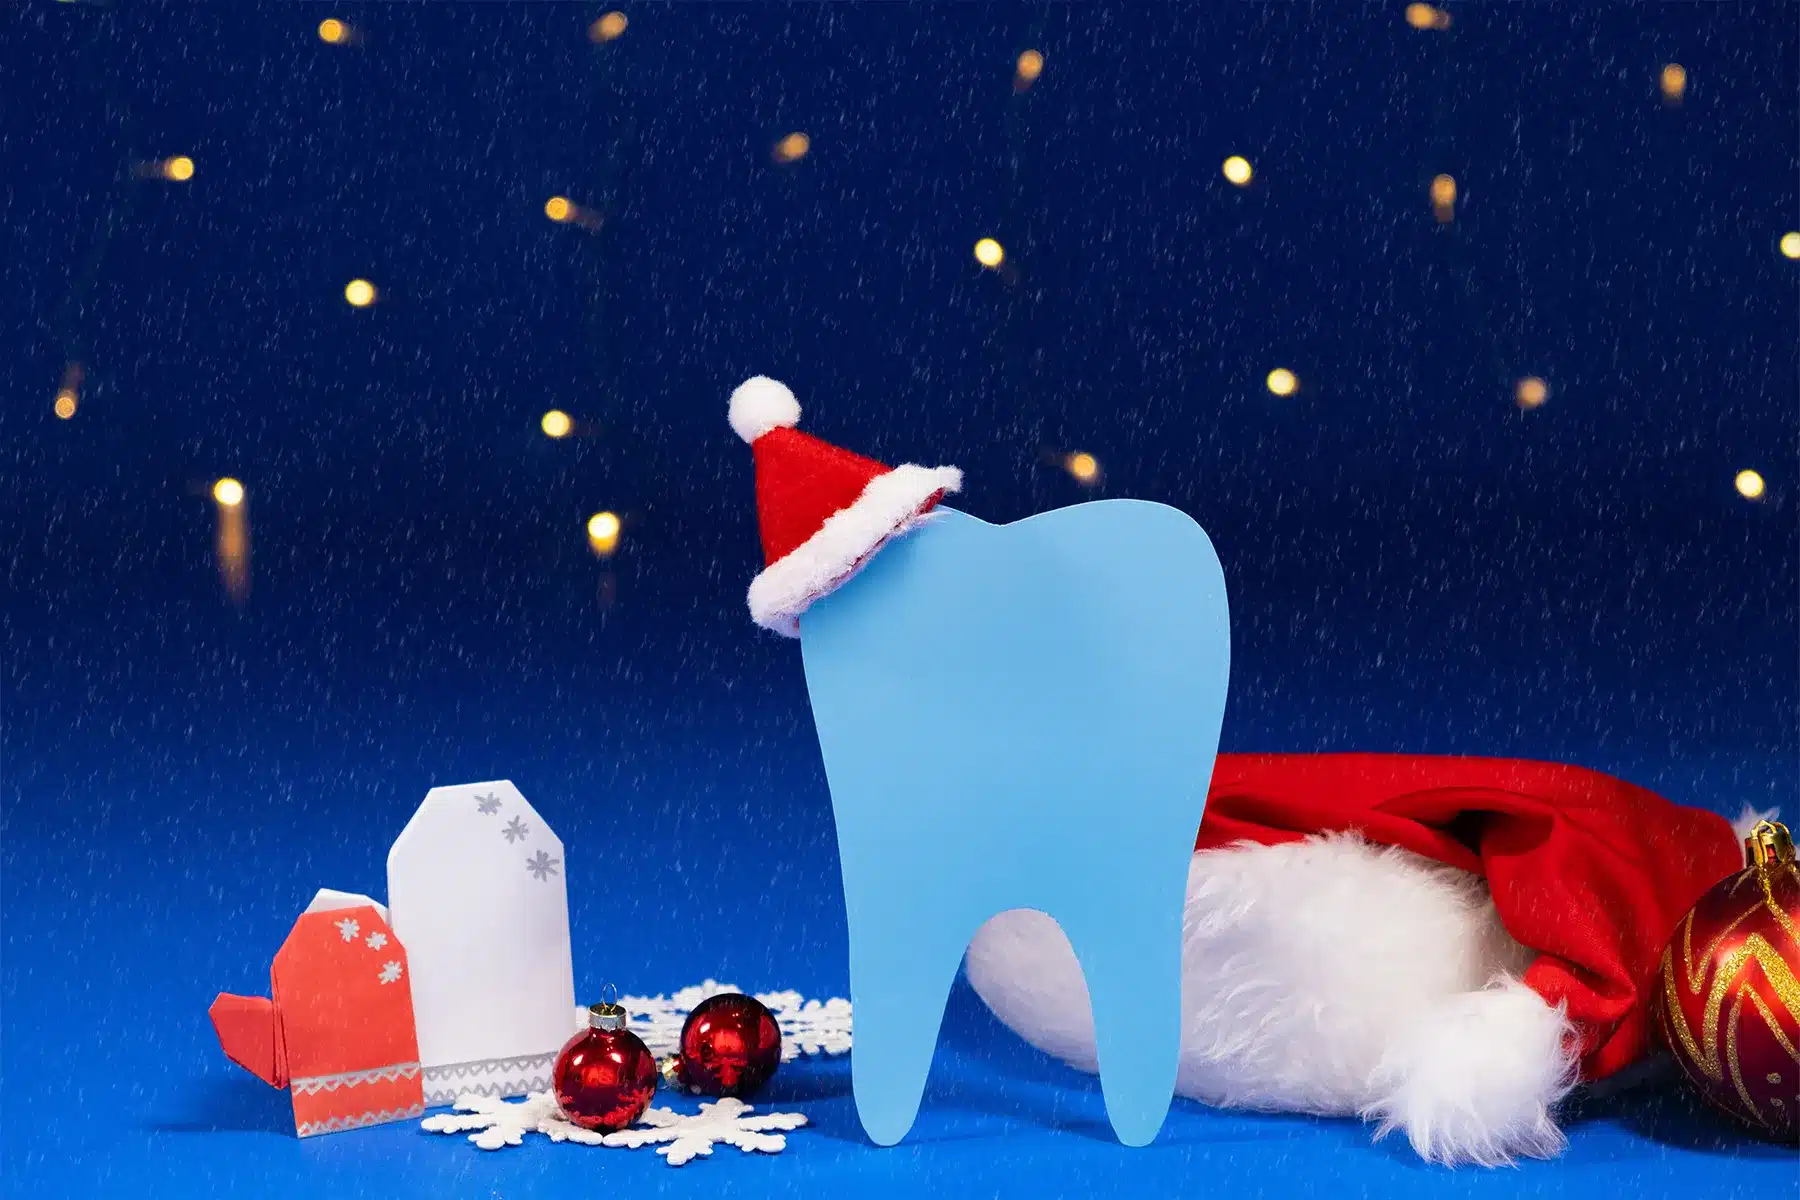 What to Do if You Have a dental emergency over Christmas